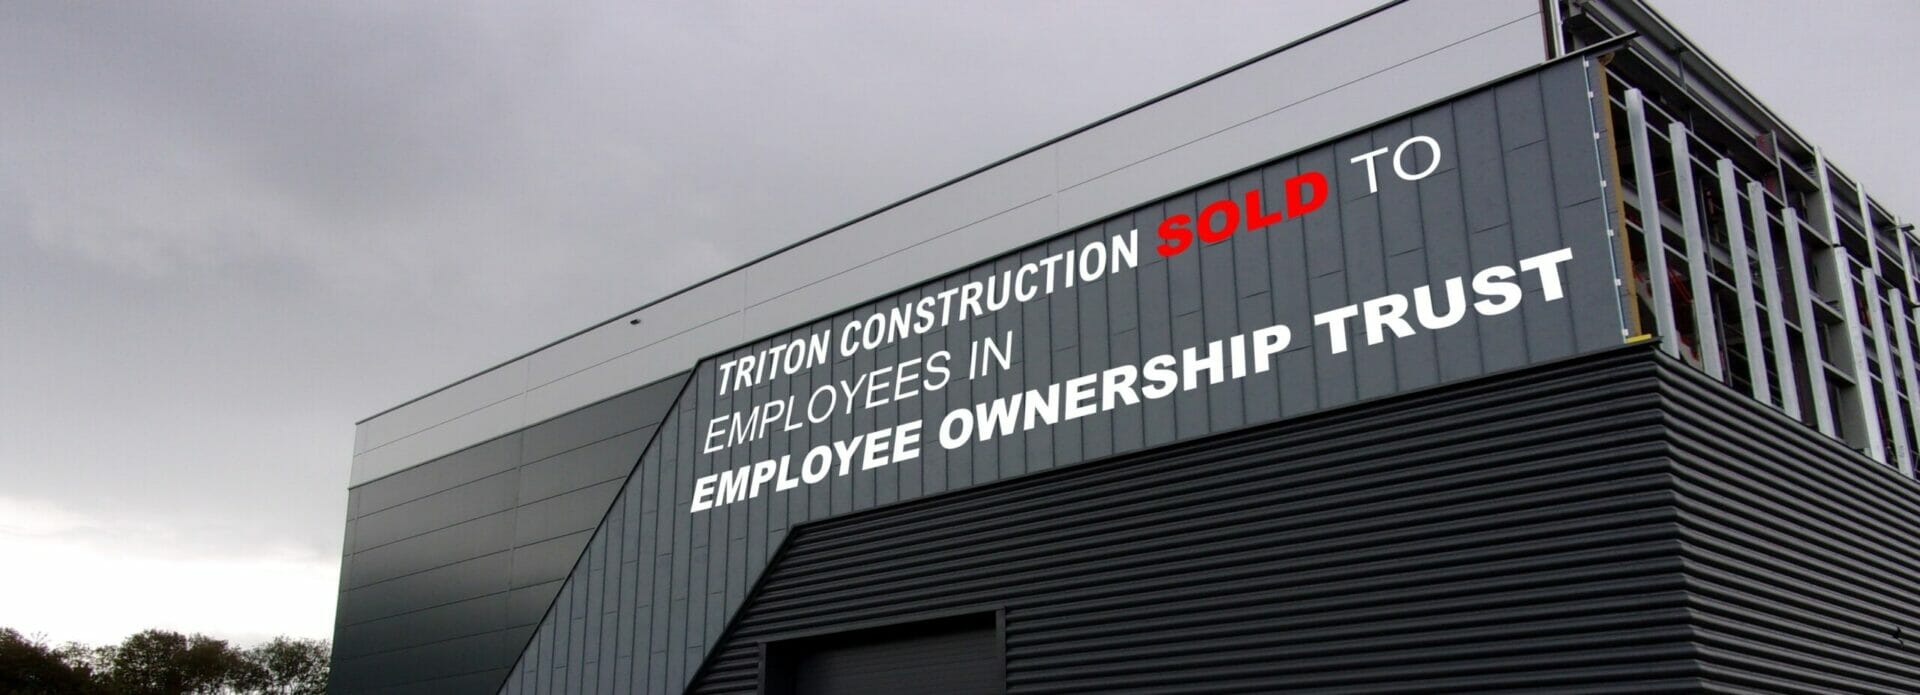 TRITON CONSTRUCTION TRANSFERS BUSINESS  OWNERSHIP TO ITS EMPLOYEES @Triton_ltd